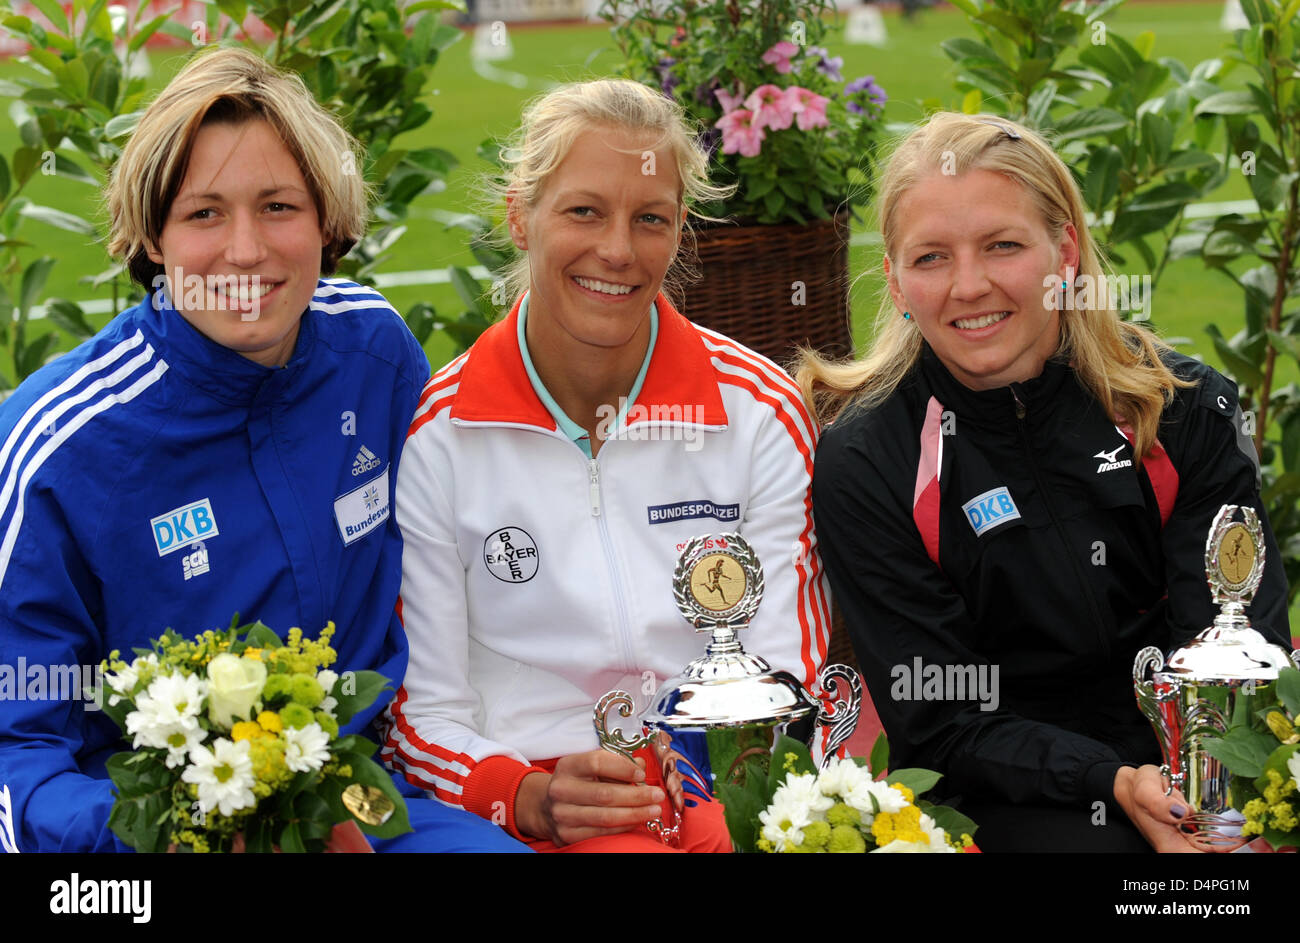 German decathletes Jennifer Oerser (C), Julia Maechtig (L) and Lilli Schwarzkopf (R) smile after the German Combined Athletics Meeting in Ratingen, Germany, 21 June 2009. Oeser won the women?s heptathlon competition, Schwarzkopf finished third and Maechtig fourth. The two-day event is the last chance for Germany?s hept- and decathletes to qualify for the IAAF World Championships in Stock Photo